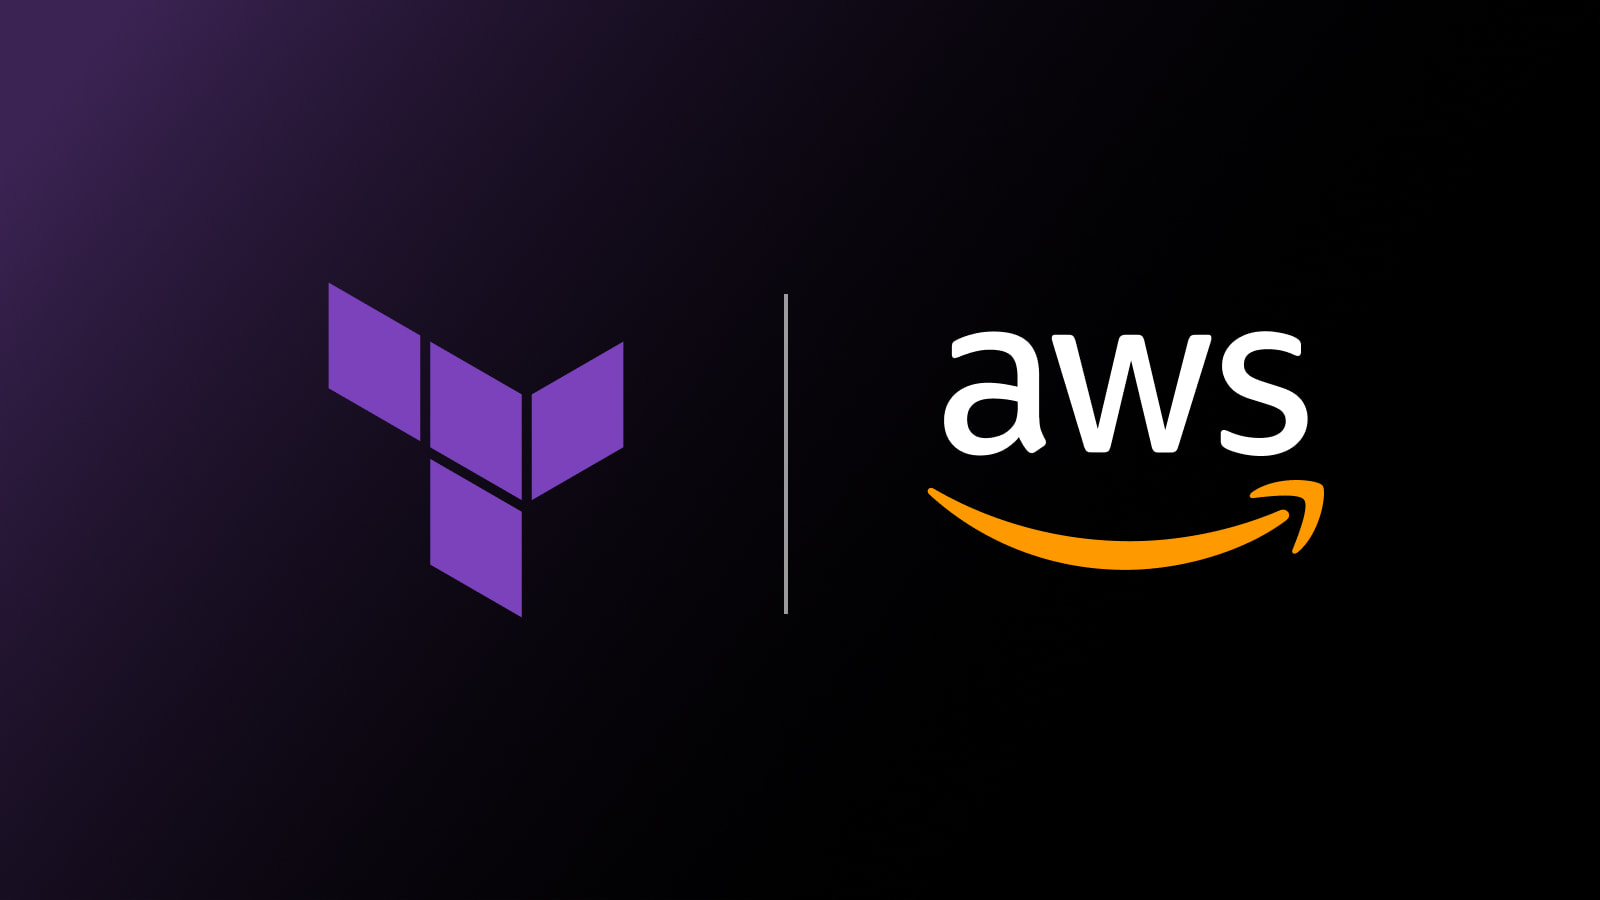 HashiCorp Teams with AWS on New Control Tower Account Factory for Terraform